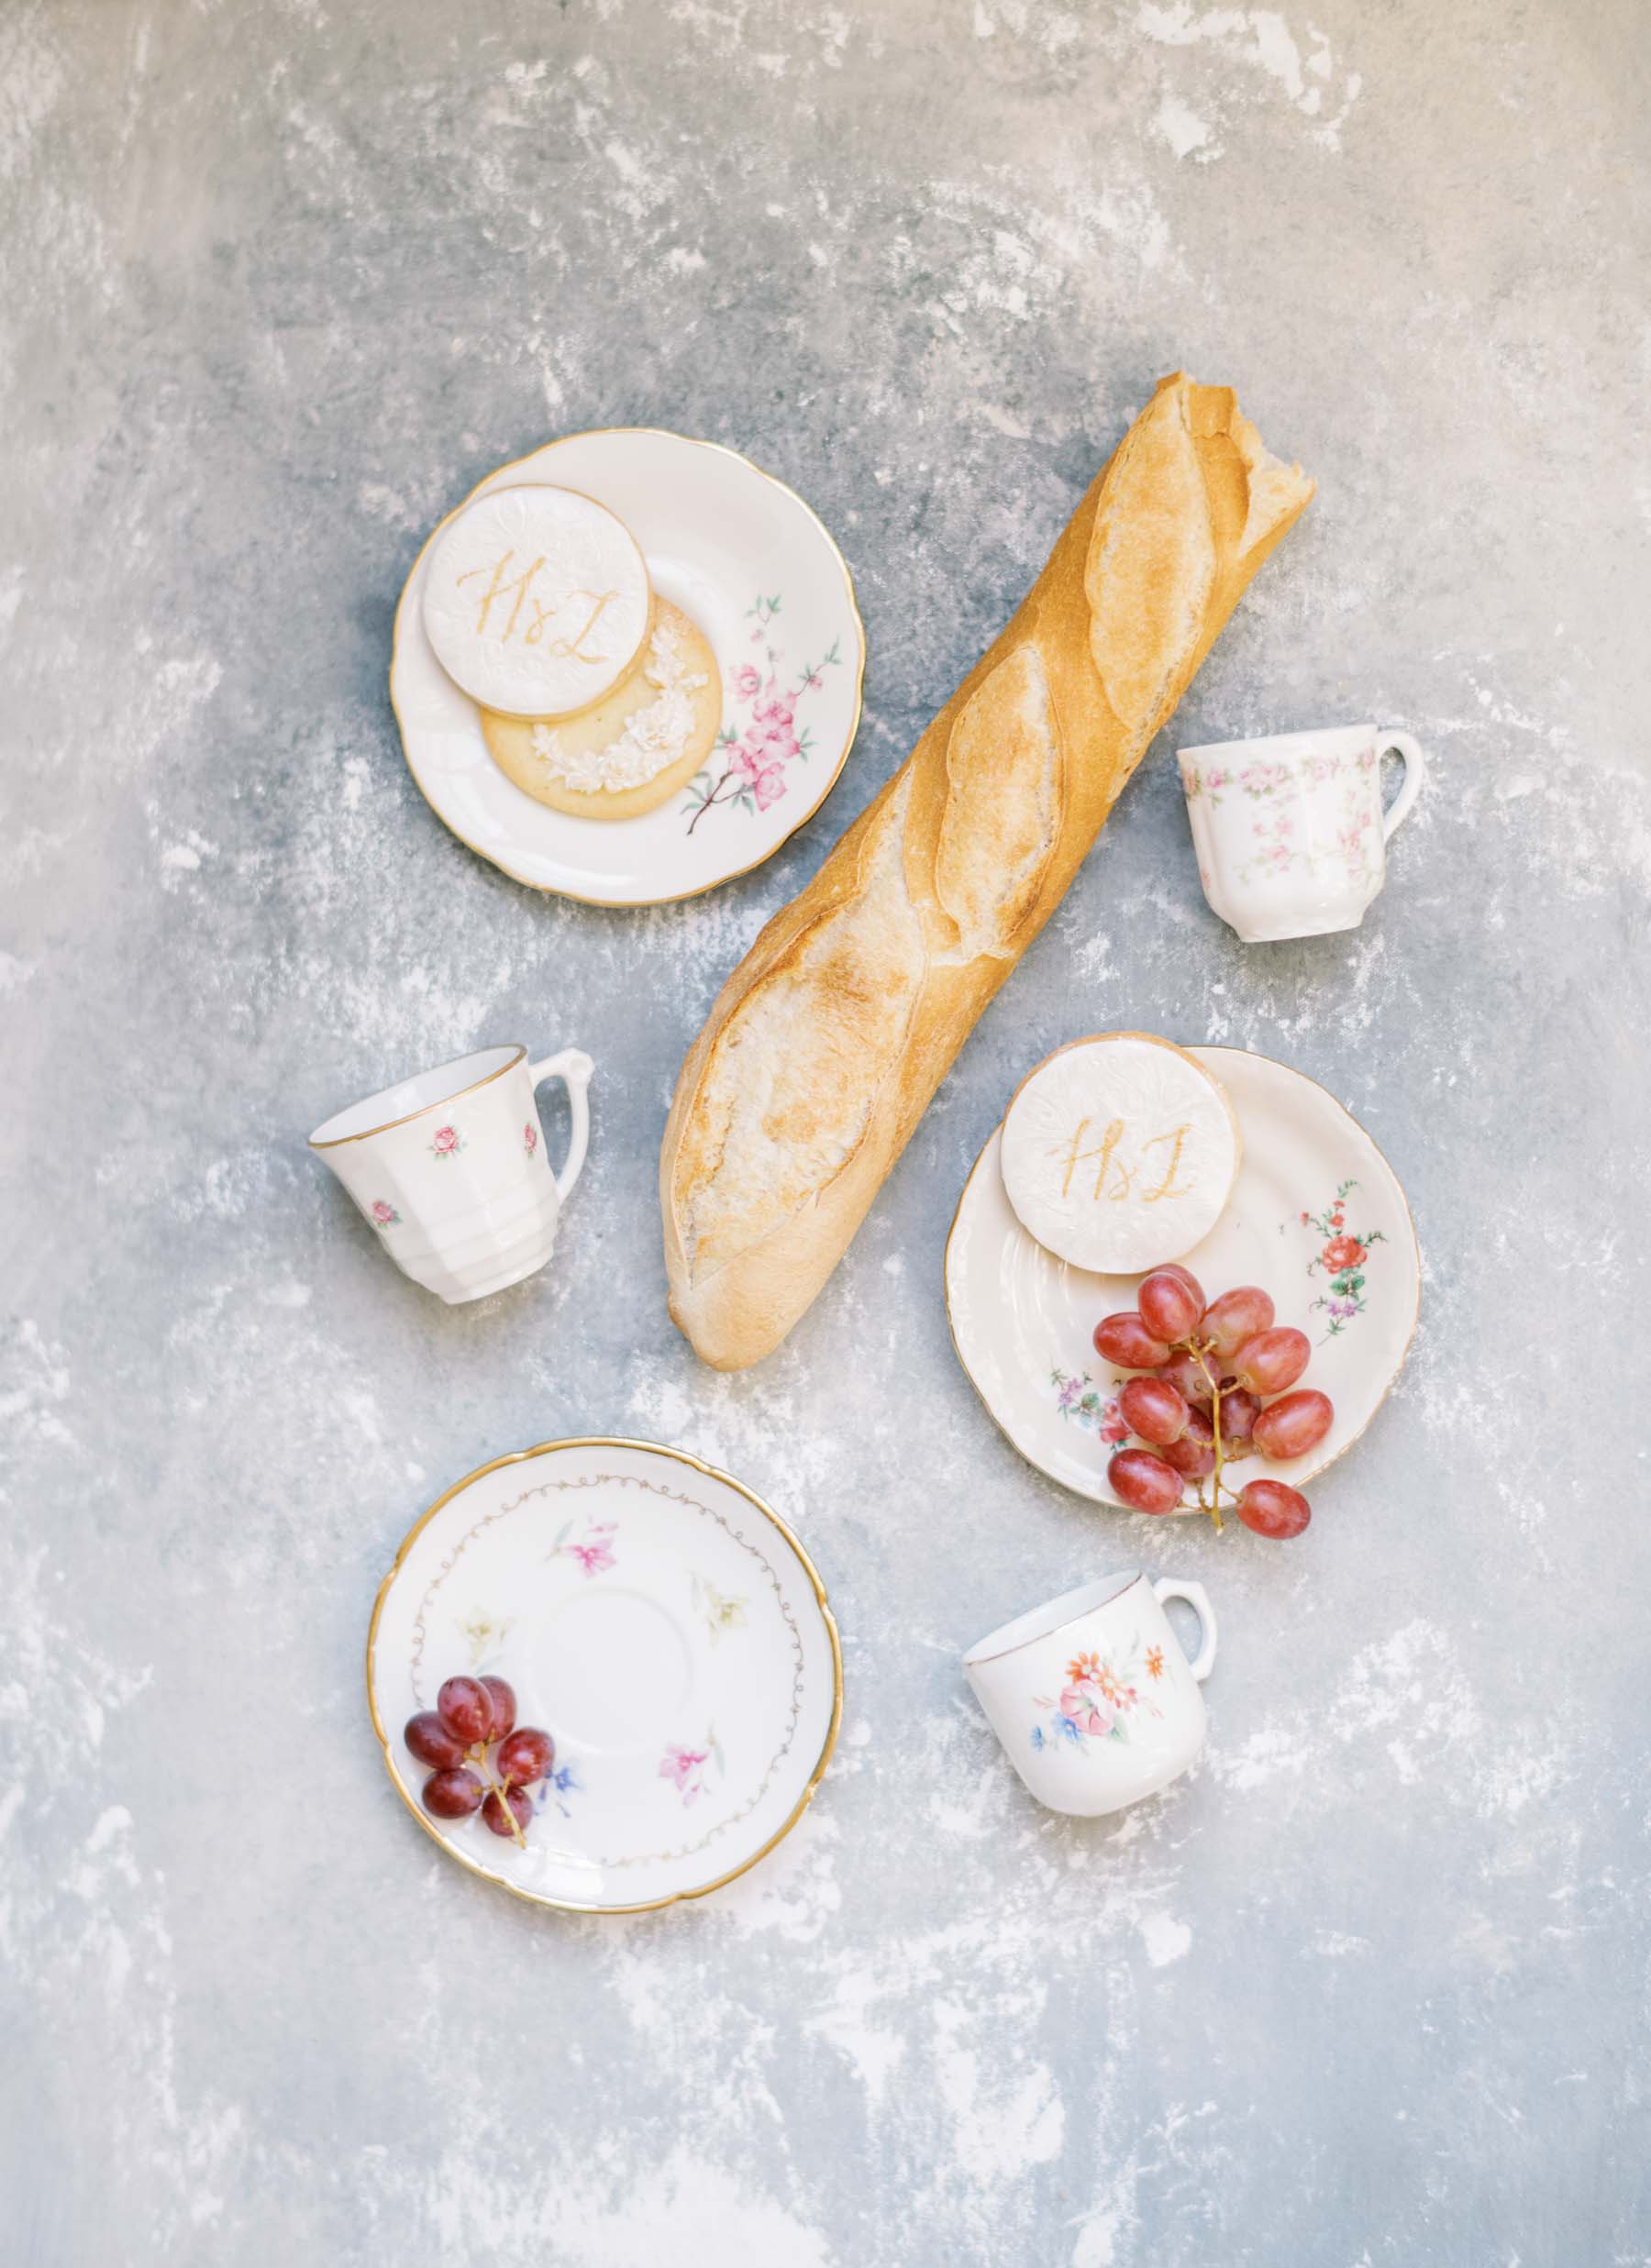 Paris chateau wedding pastries and teacup china